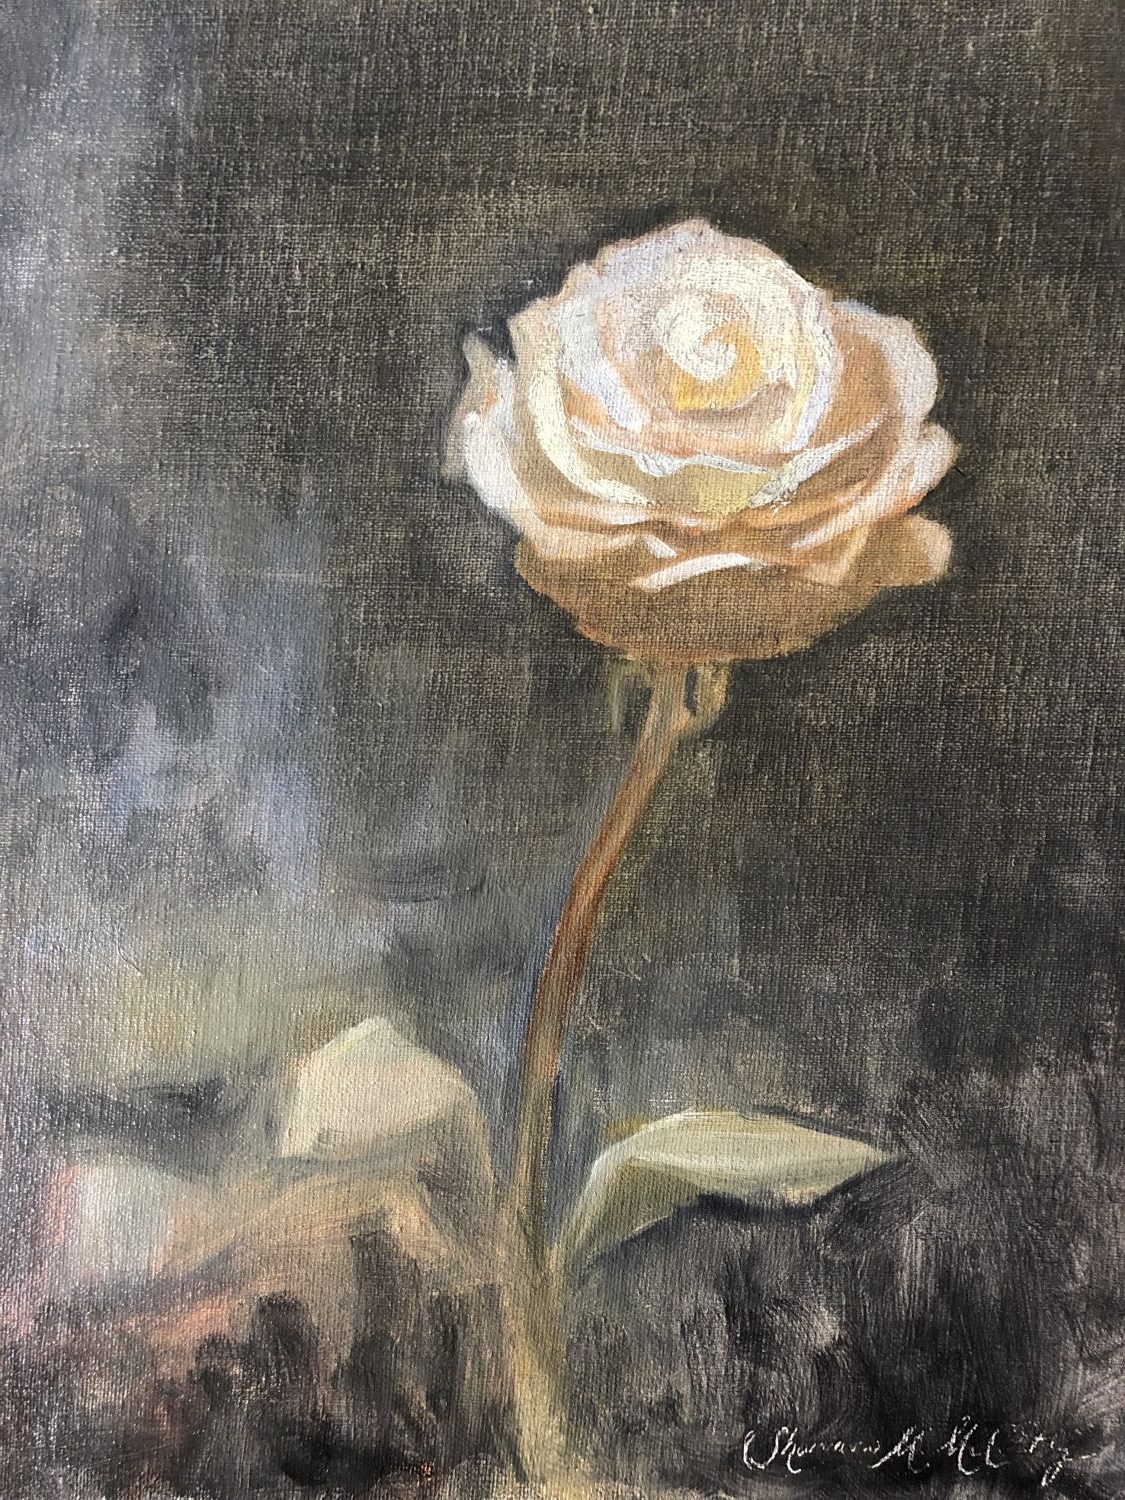 White Rose on a Stormy Day